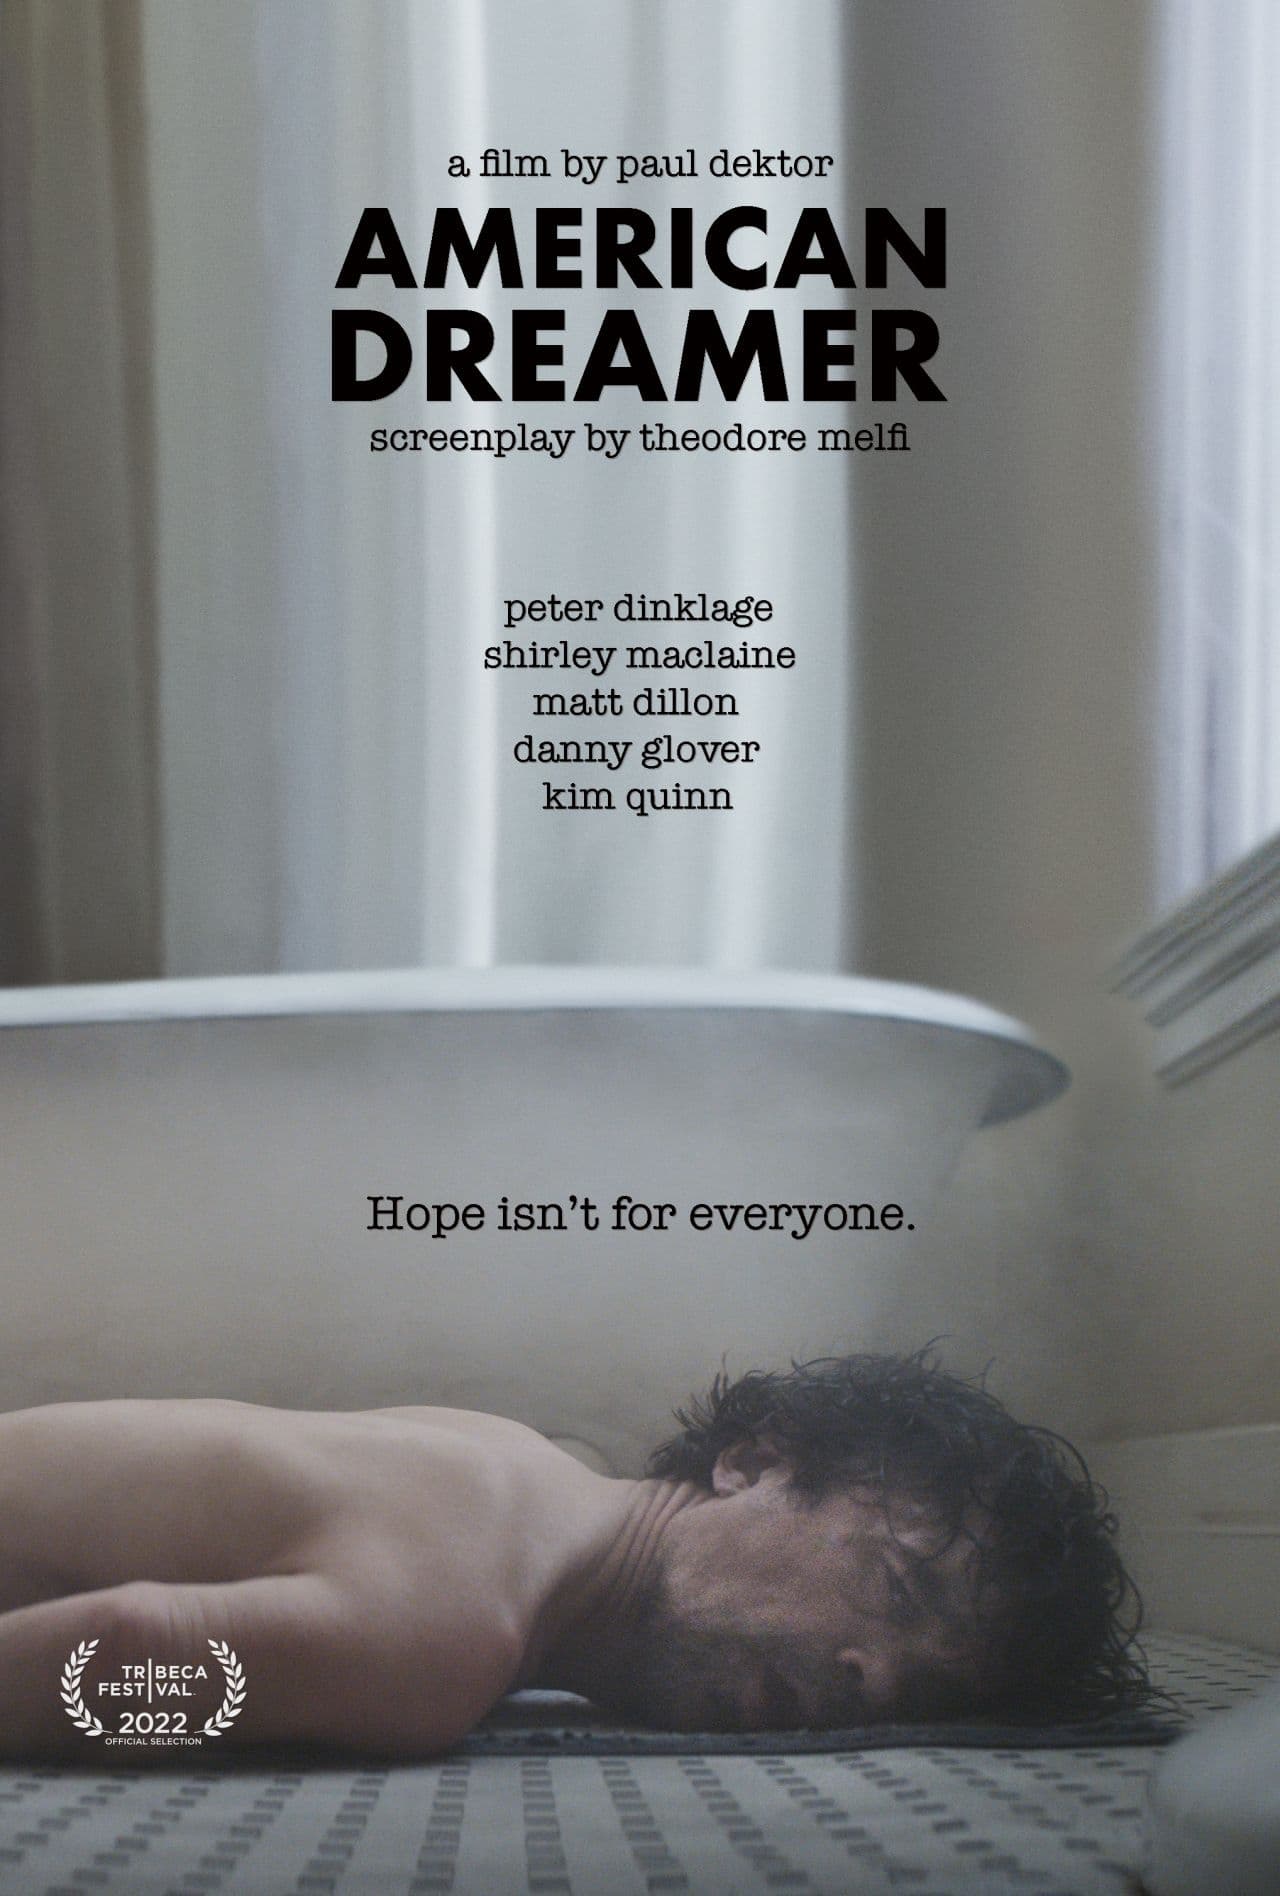 Poster for the movie "American Dreamer"